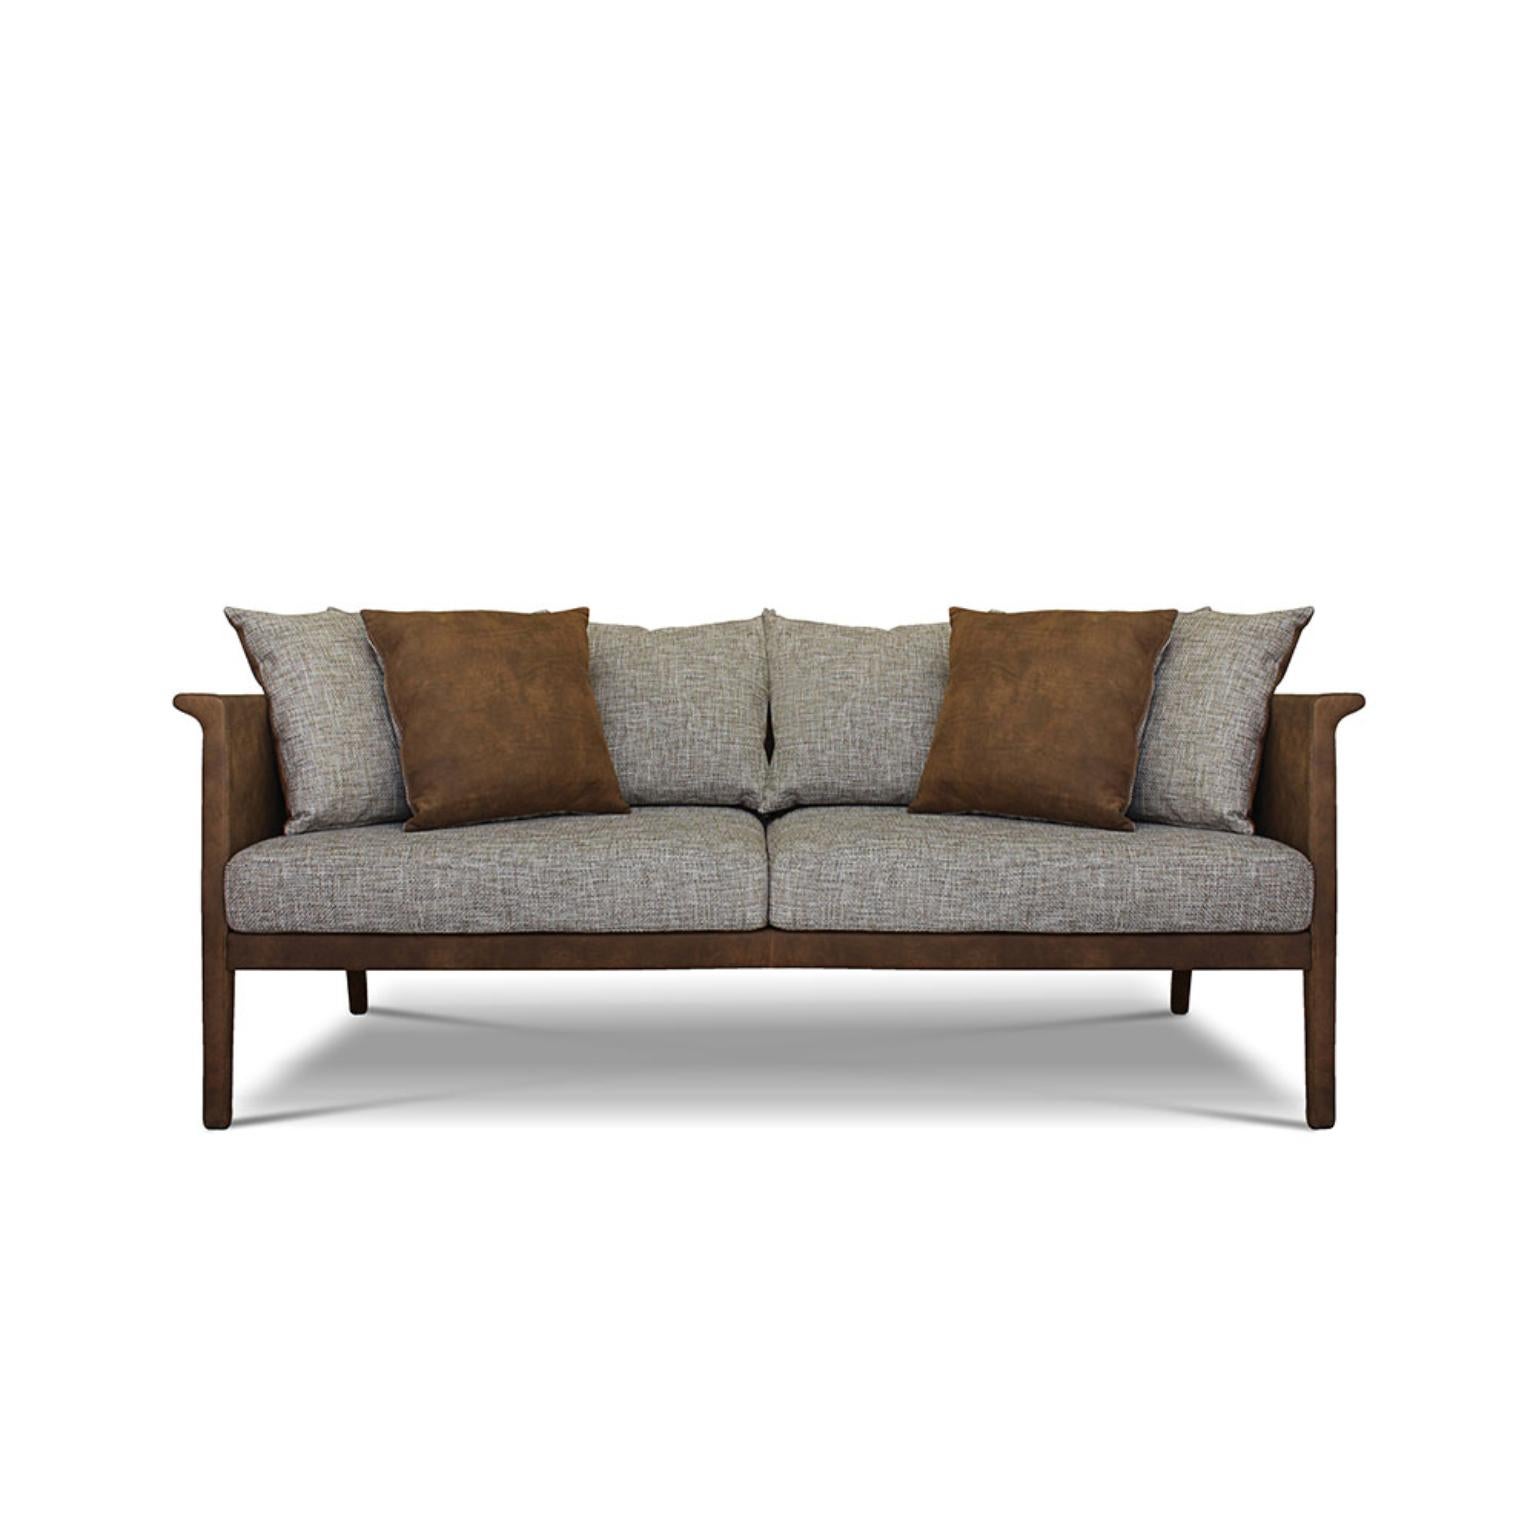 Unique franz sofa by Collector
Dimensions: W 200 x D 85 x H 86 cm
Materials: Fabric, leather
Other materials available.

The Collector brand aims to be part of the daily life by fusing furniture to our home routine and lifestyle, that’s why